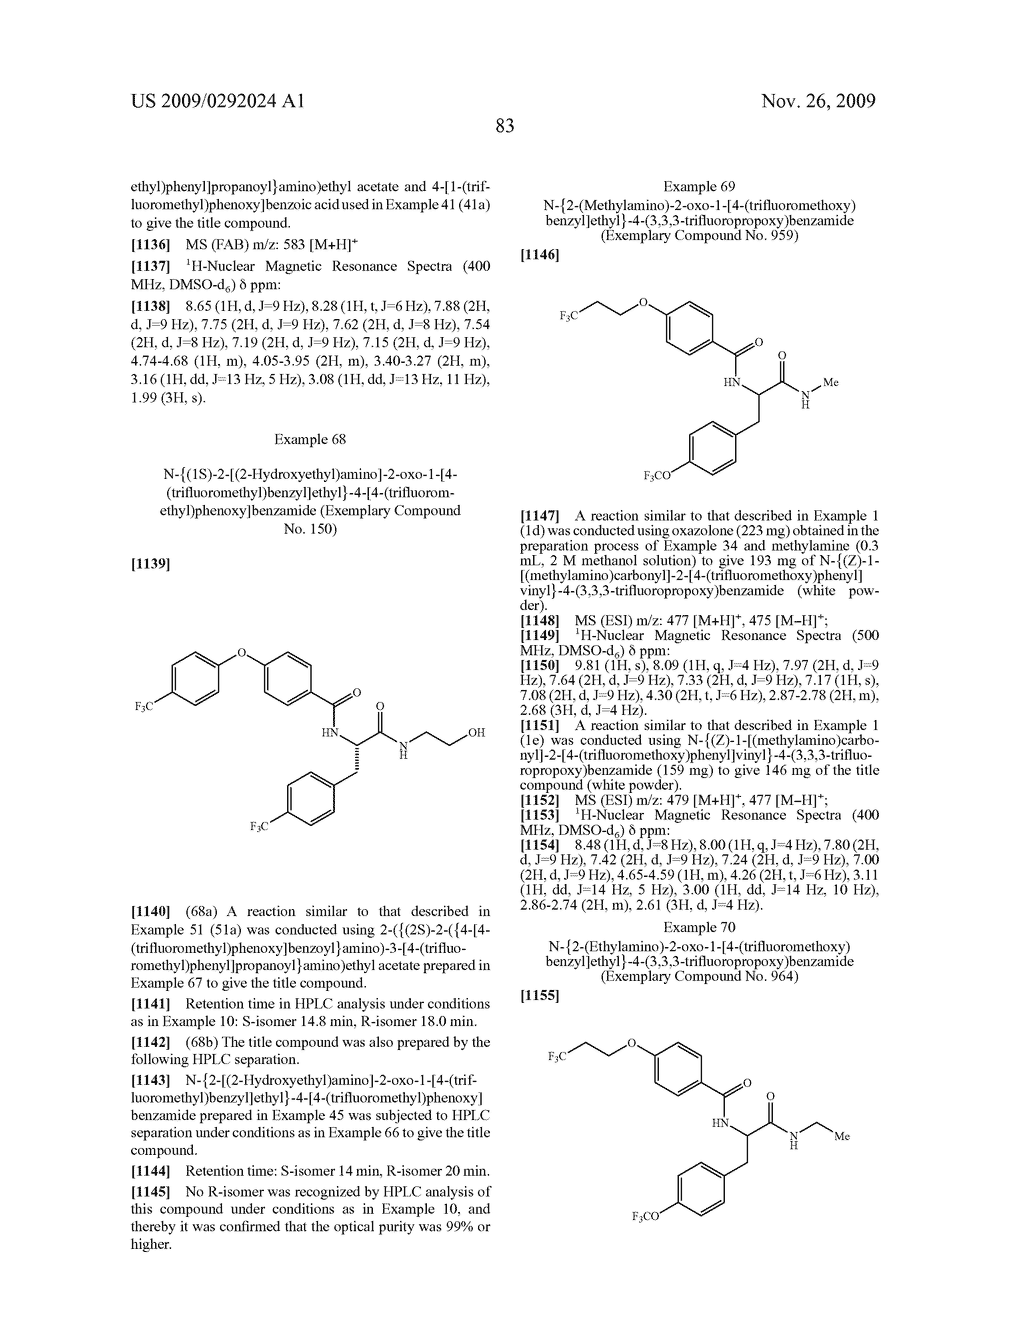 SUBSTITUTED PROPANAMIDE DERIVATIVE AND PHARMACEUTICAL COMPOSITION CONTAINING THE SAME - diagram, schematic, and image 84